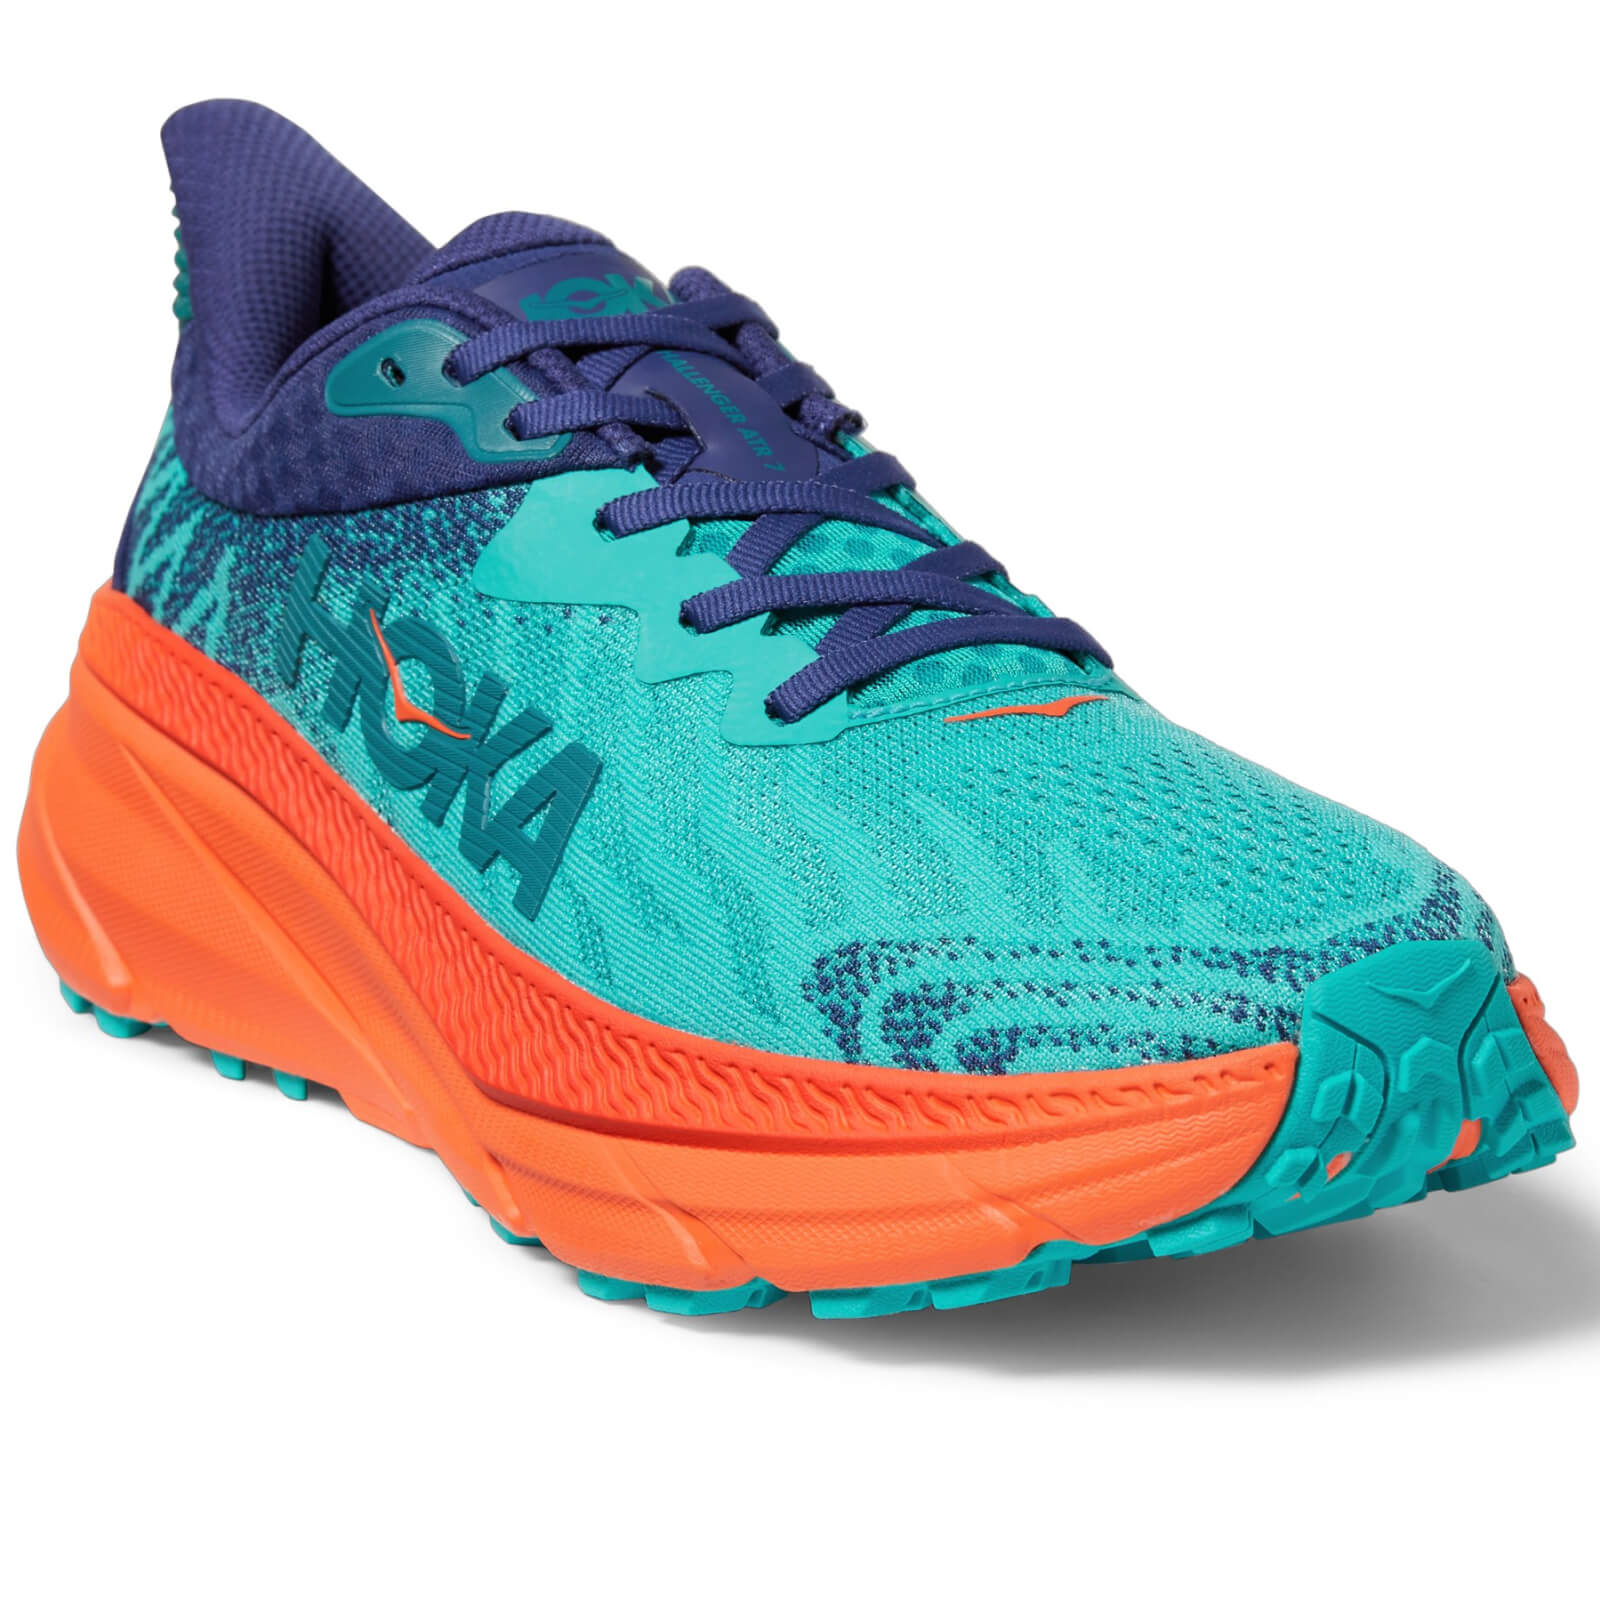 HOKA Challenger 7 Review | Great All-Purpose Trail Shoe